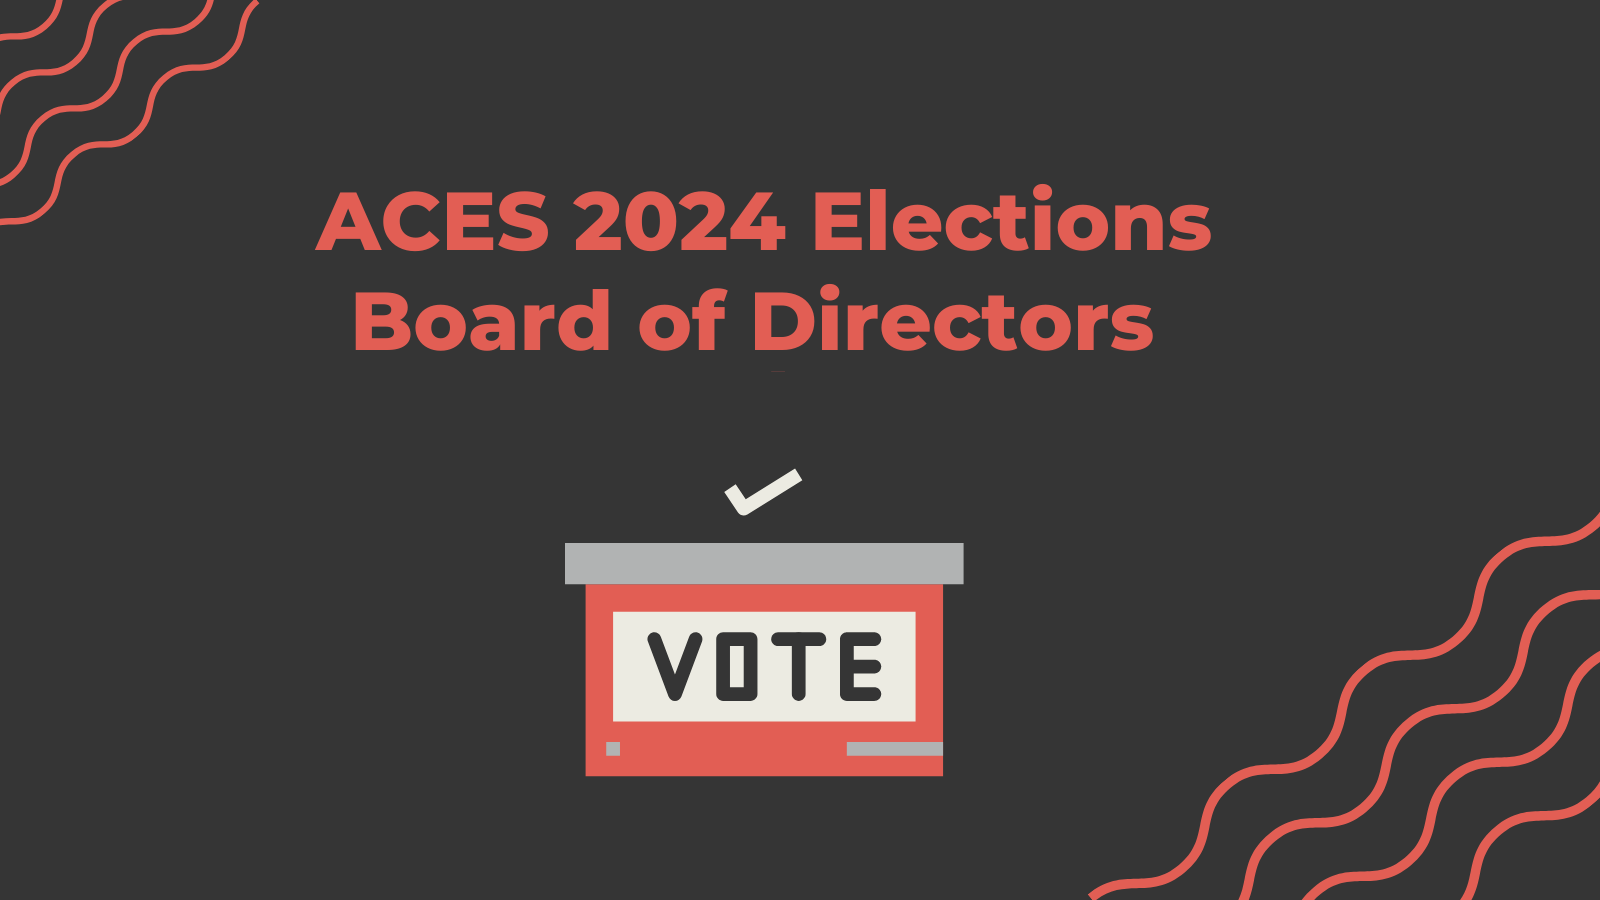 Now is the Time to Vote for the Board of Directors